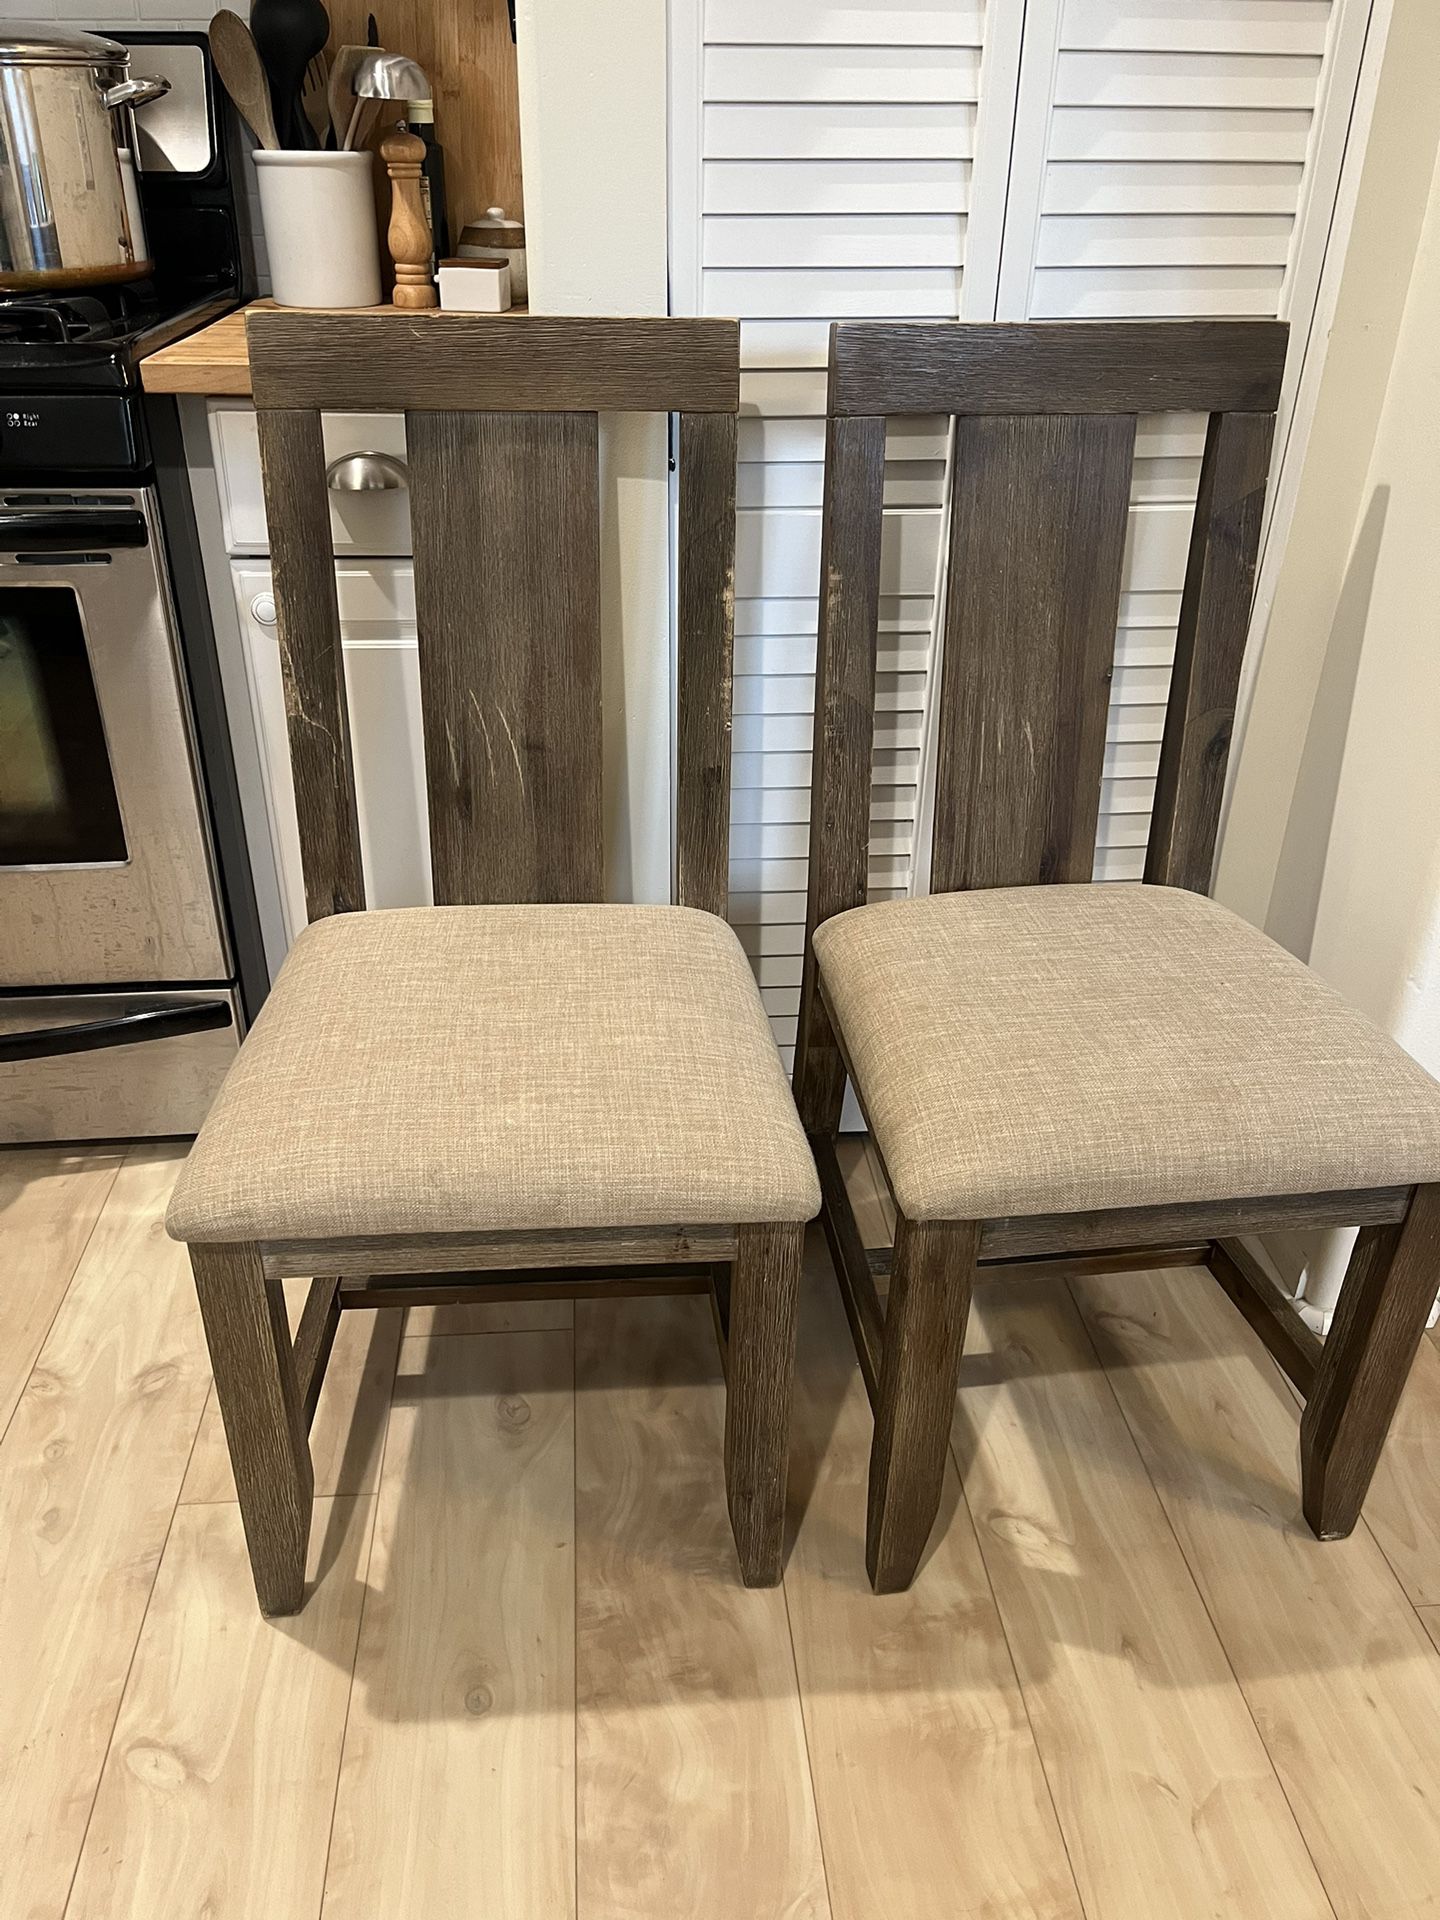 Dining chairs- Set of 2 